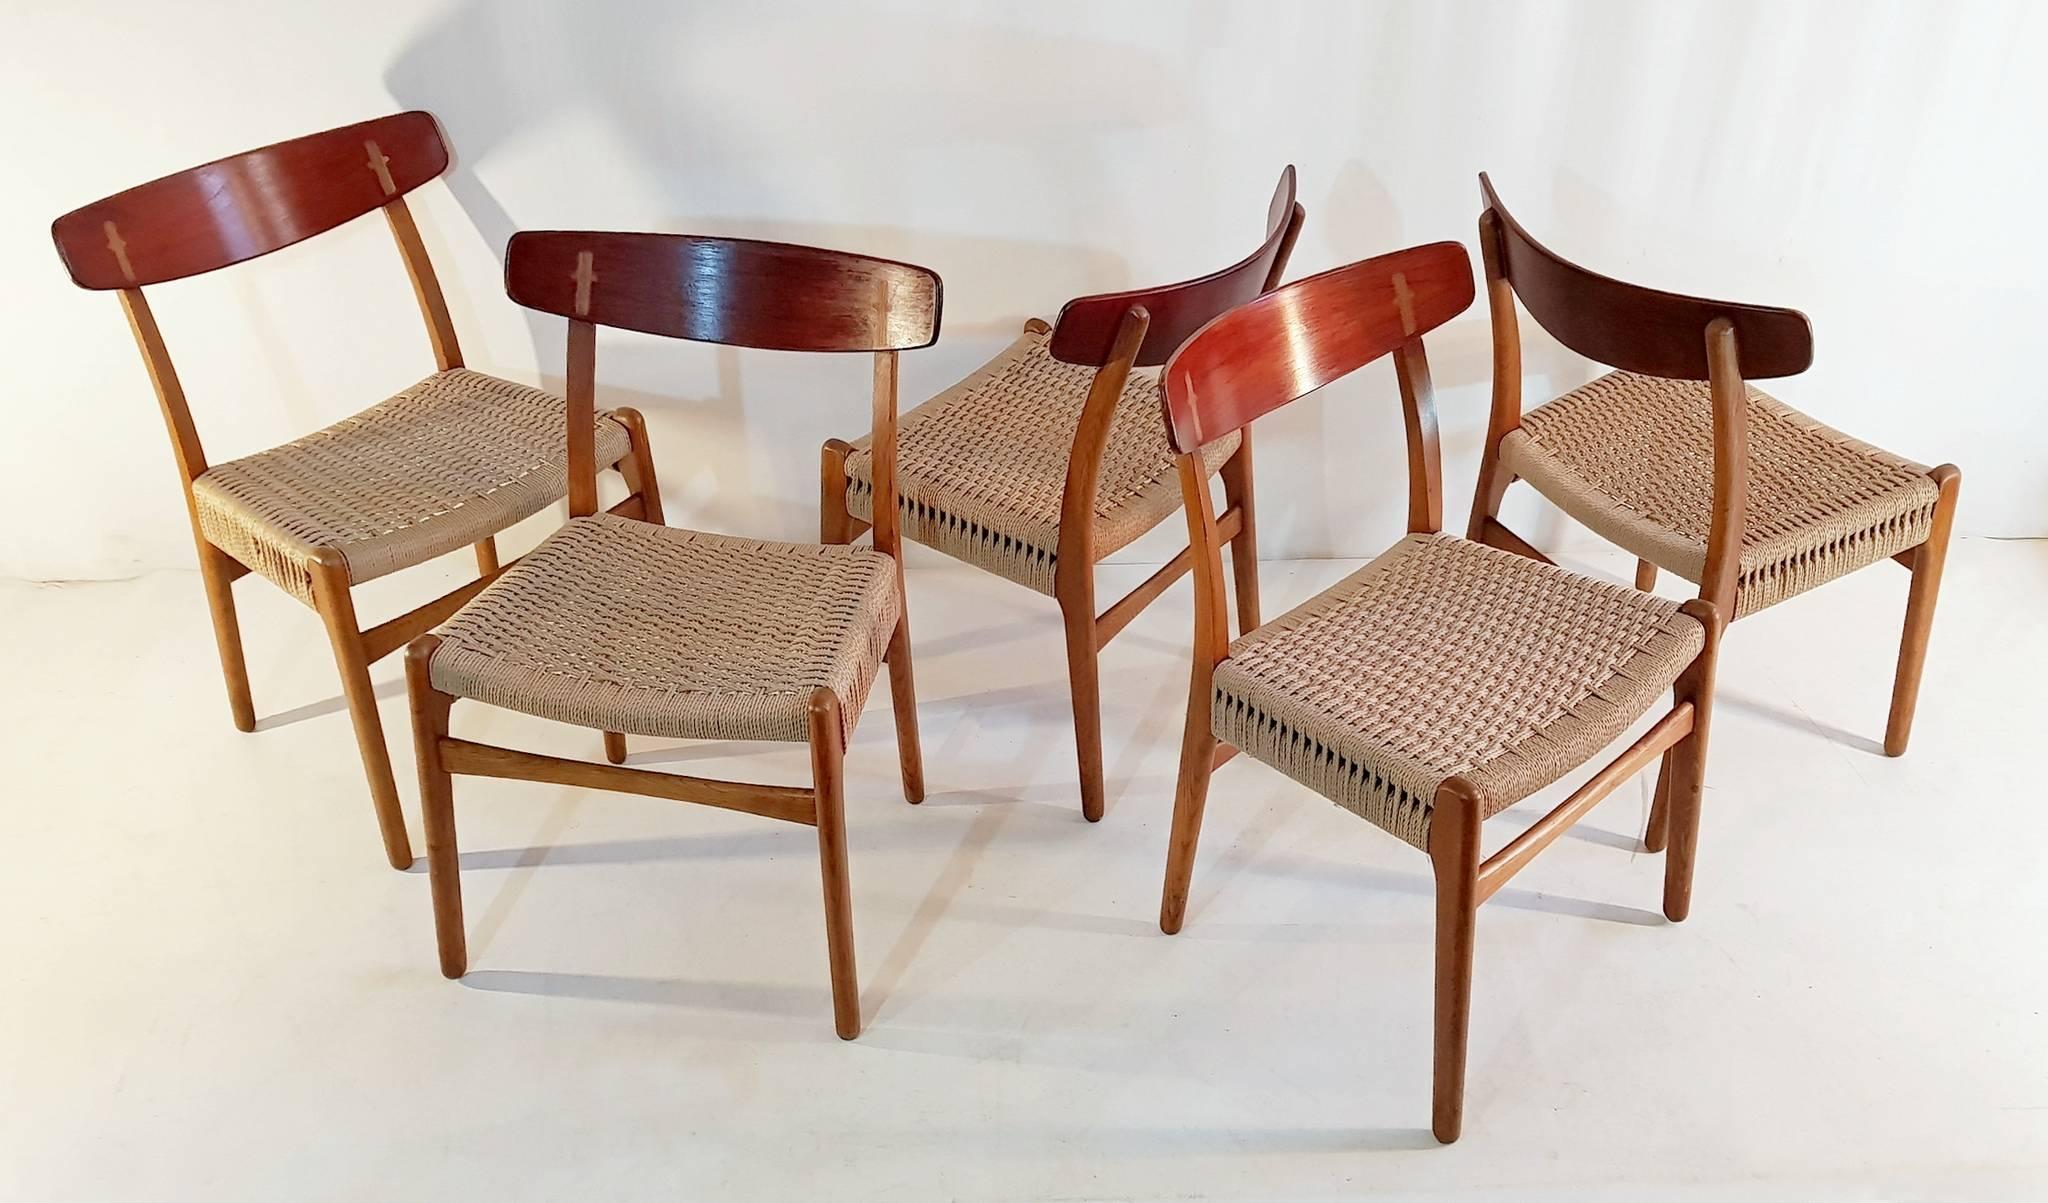 This is an early set of five Hans Wegner model CH23 oak dining chairs produced by Carl Hansen & Son in Odense, Denmark. All chairs are marked underneath the seat stating designer and producer clearly. The chairs has been fully restored including new